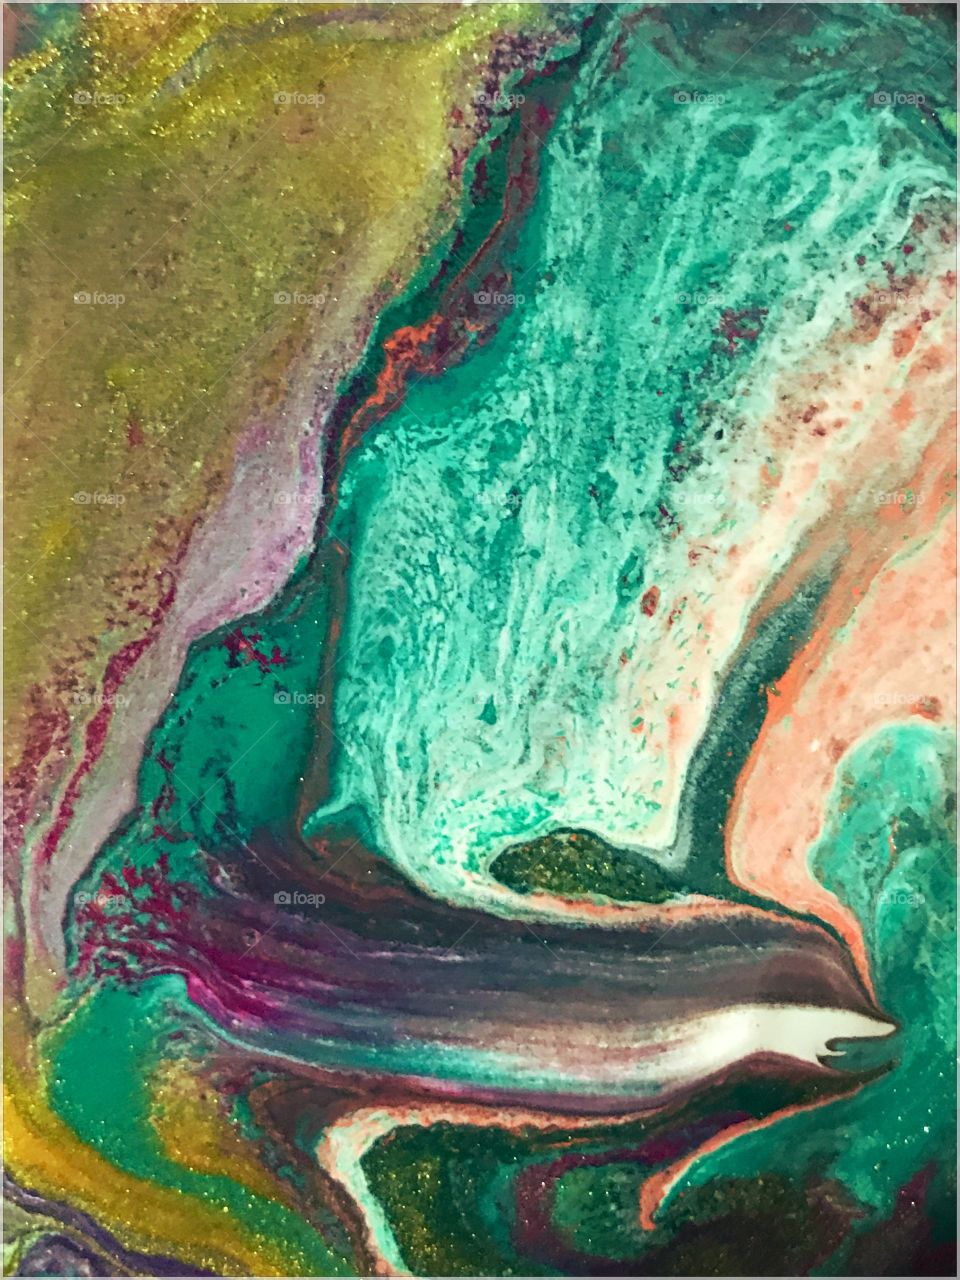 Acrylic pouring, shows rush of colours on the canvas hurrying to spread all over it in a very beautiful colorful messy and unique way forming a dolphin like shape at the bottom right corner, isn't it adorable?! ❤️